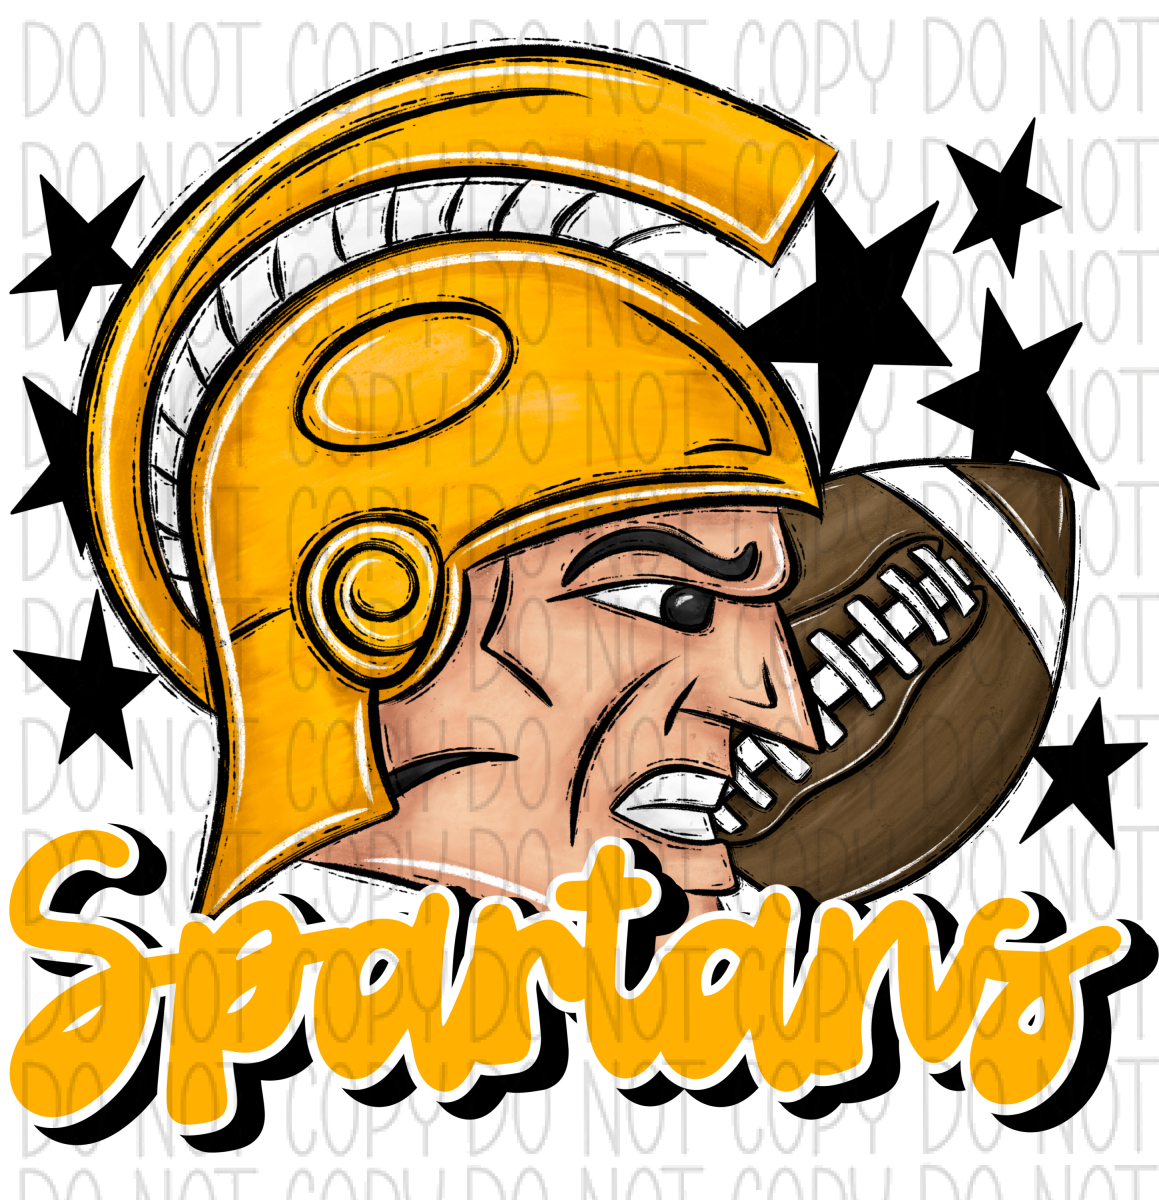 Mascot Spartans Football Dtf Transfer (See Color Options) Pocket Size 3 / Yellow Transfers